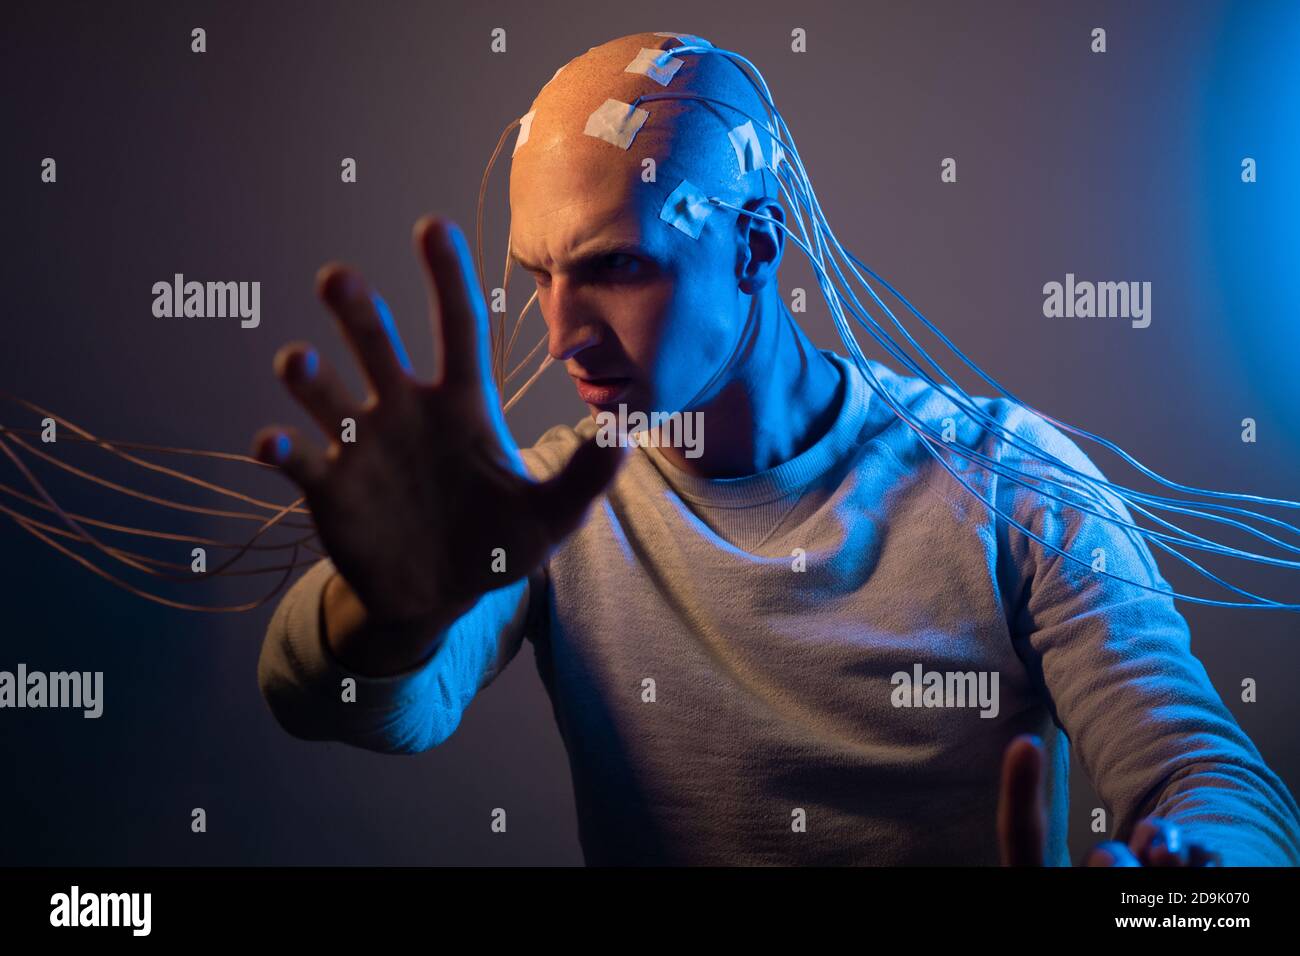 Man with a bald head with wires connected. Fear and anxiety. Examination of the brain, mind control. Stock Photo